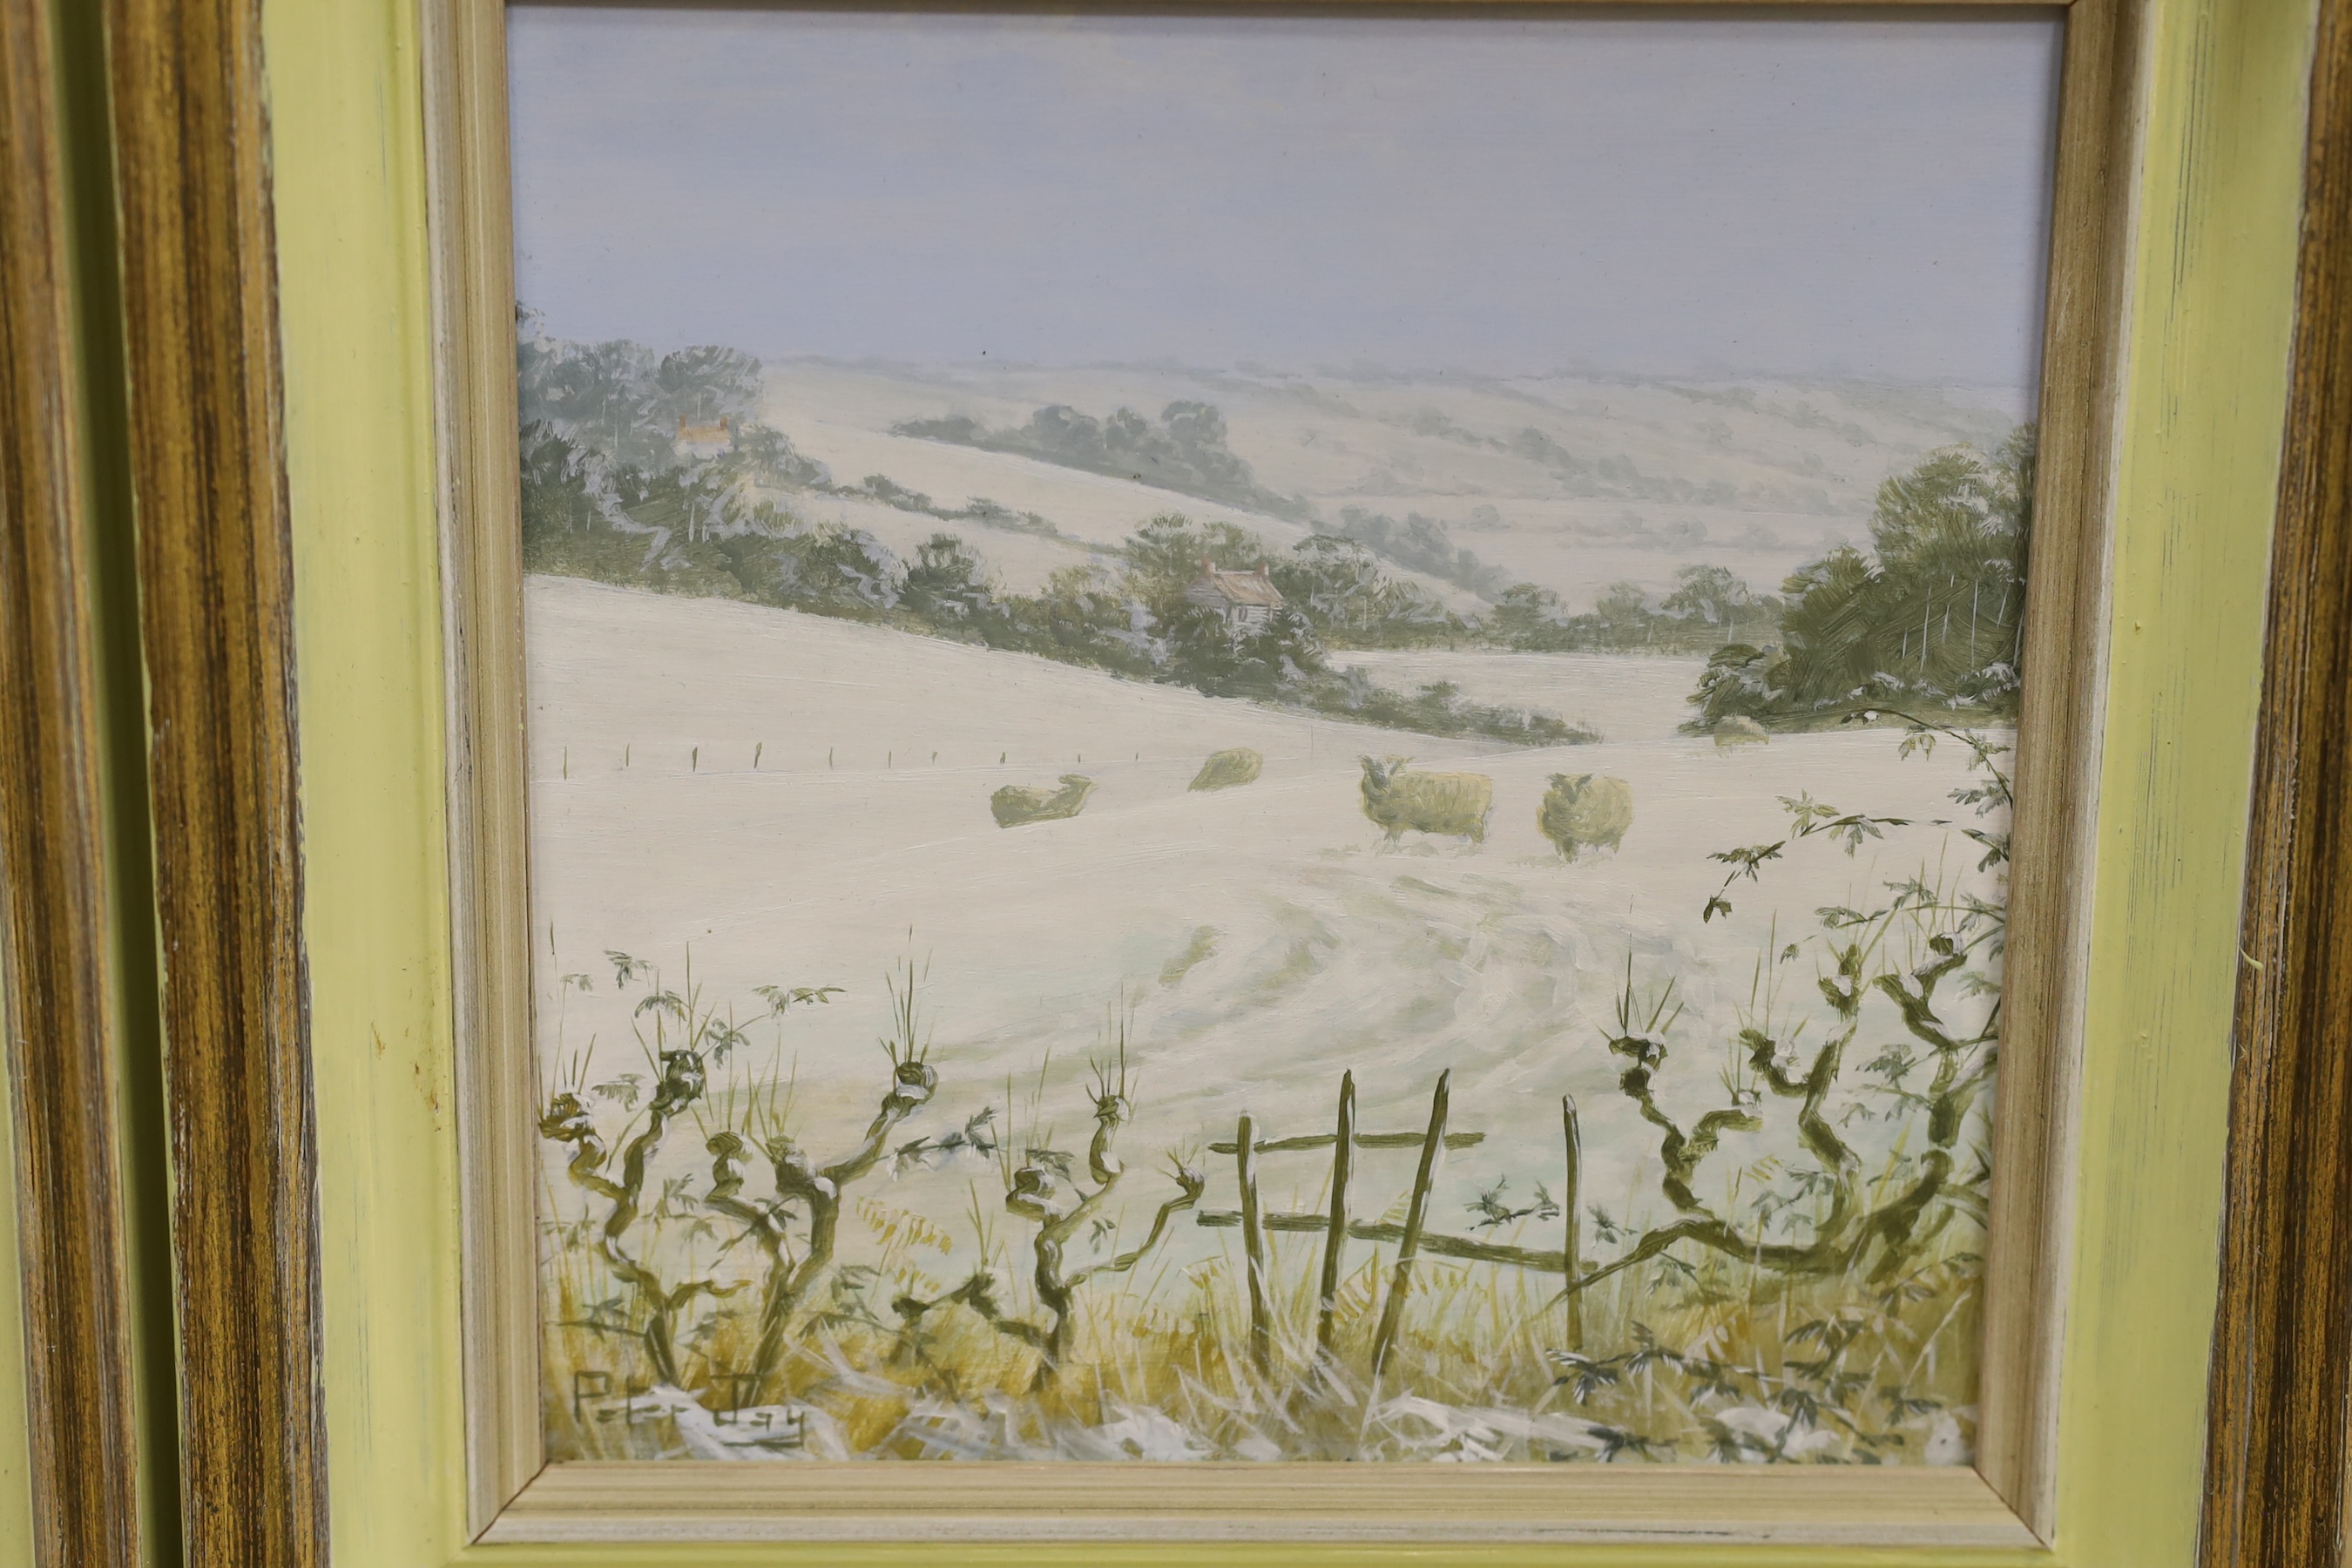 Peter Jay (b.1936), two oils on board, 'Winter sheep' and 'Peasmarsh, Rye', signed, 19 x 19cm